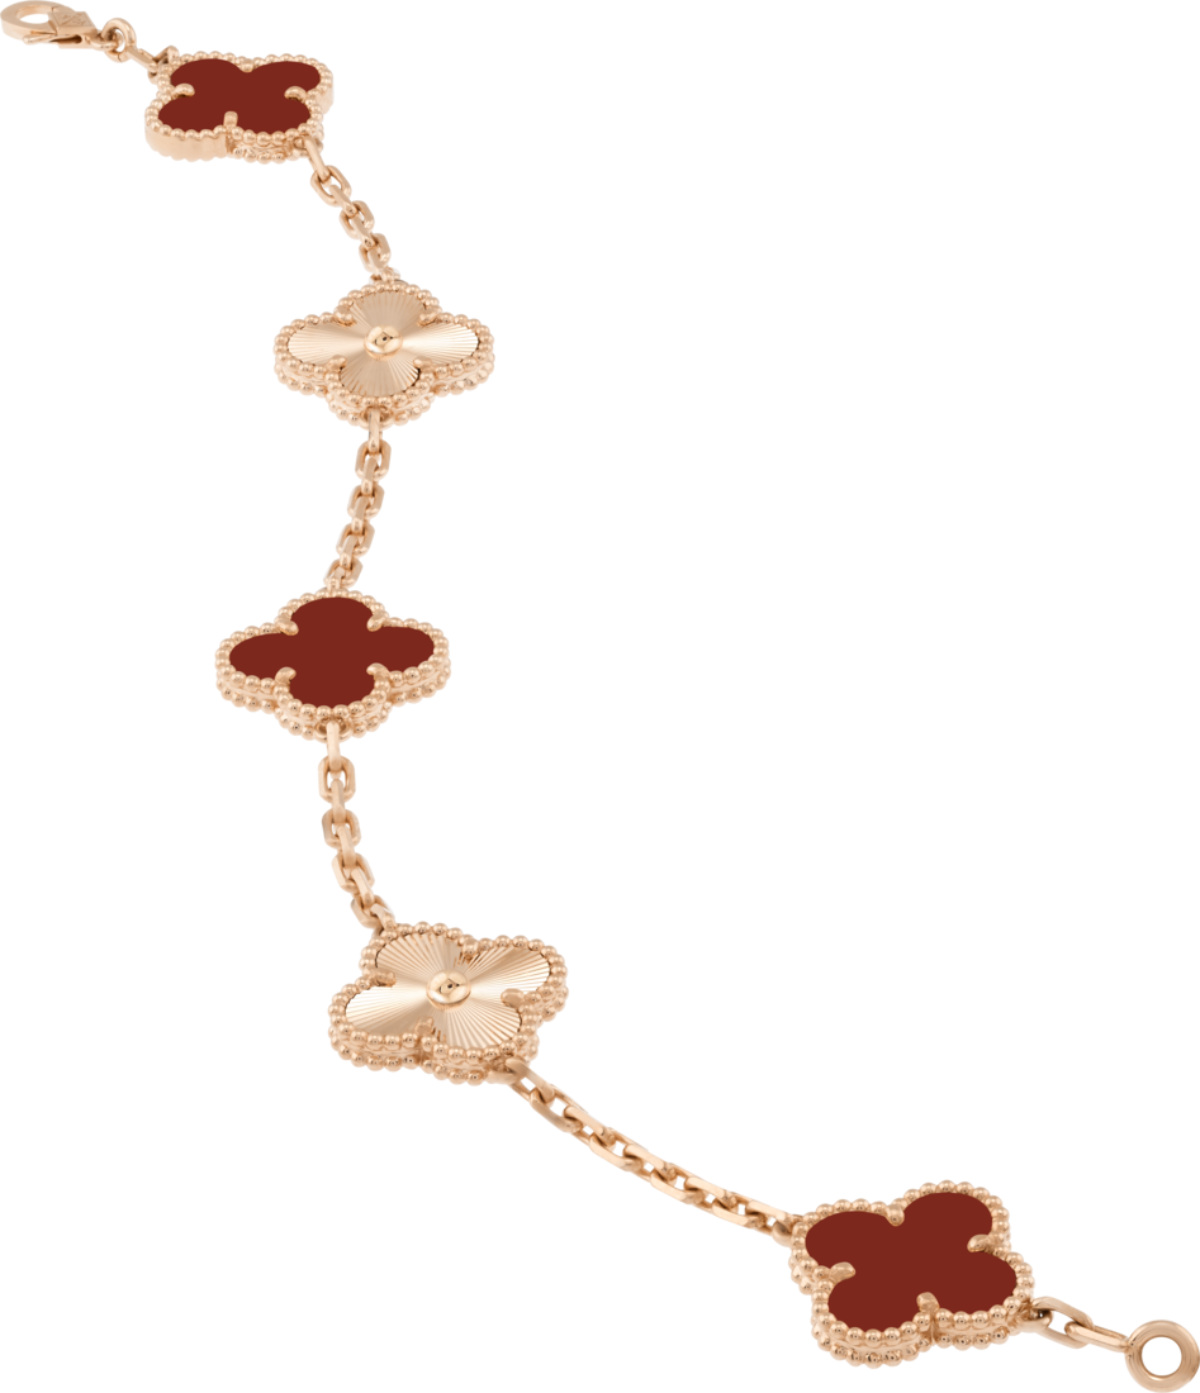 Van Cleef & Arpels introduces new lucky charms to the iconic Alhambra  collection